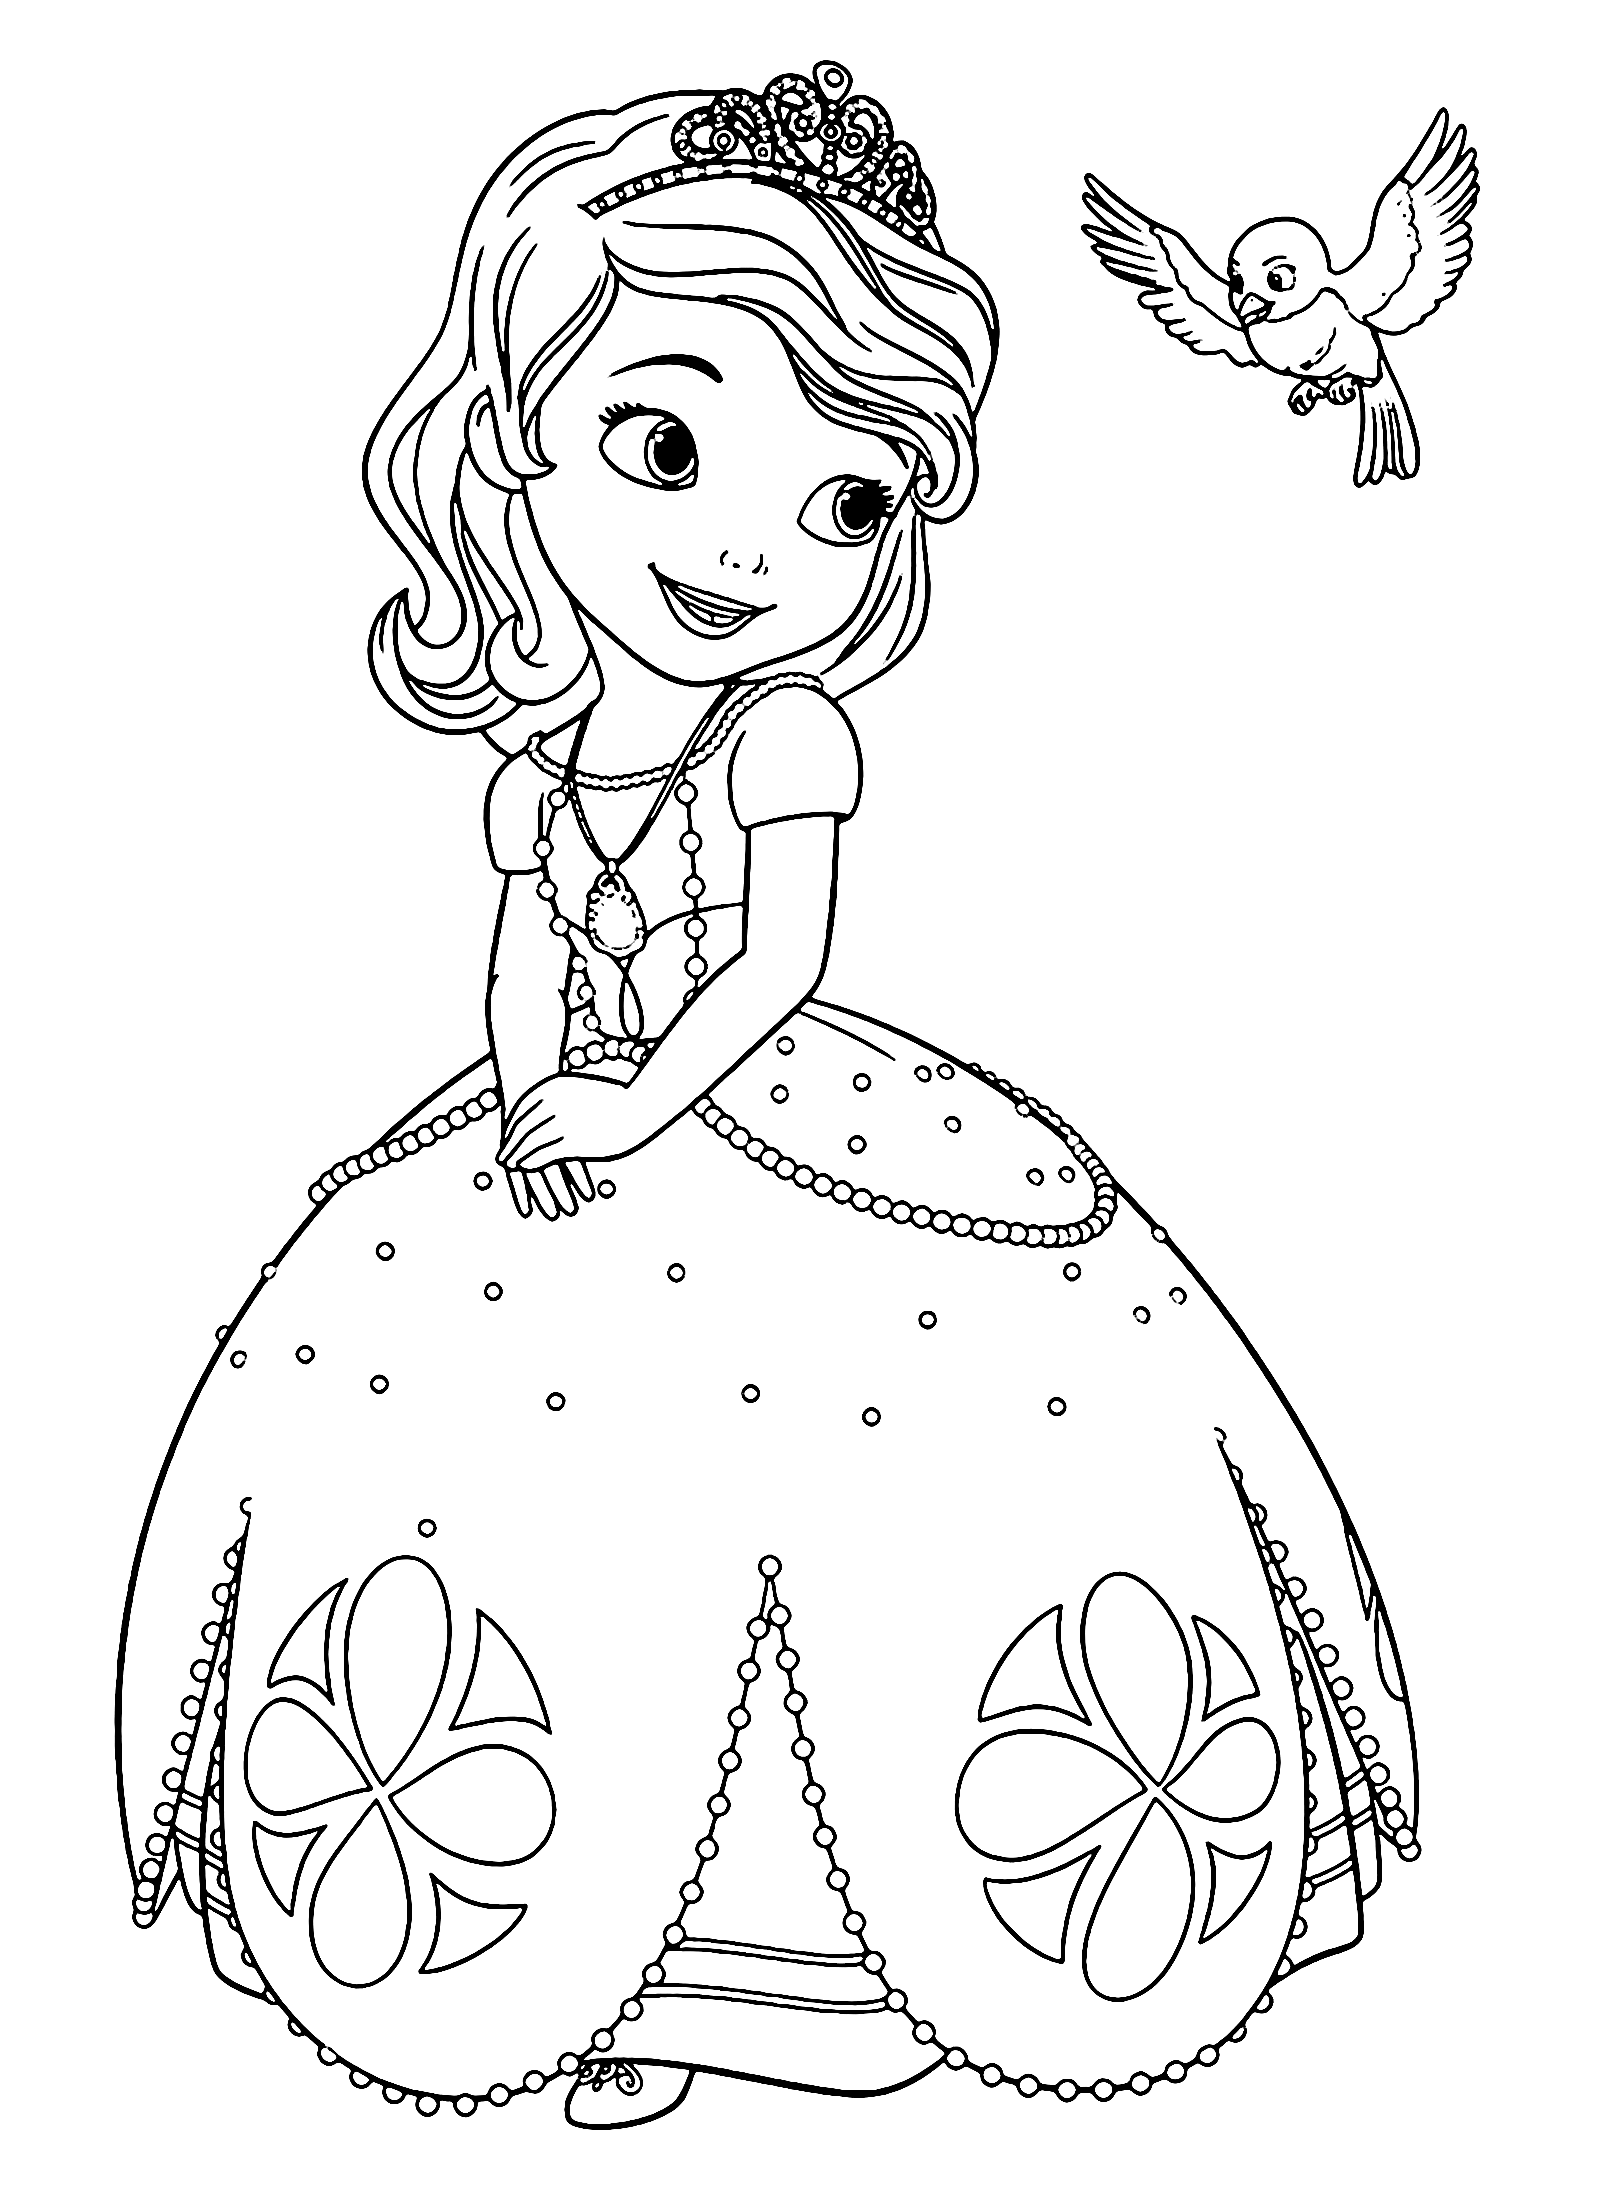 Princess Sofia the First with Her Friend Robin Bird Coloring Page for Kids